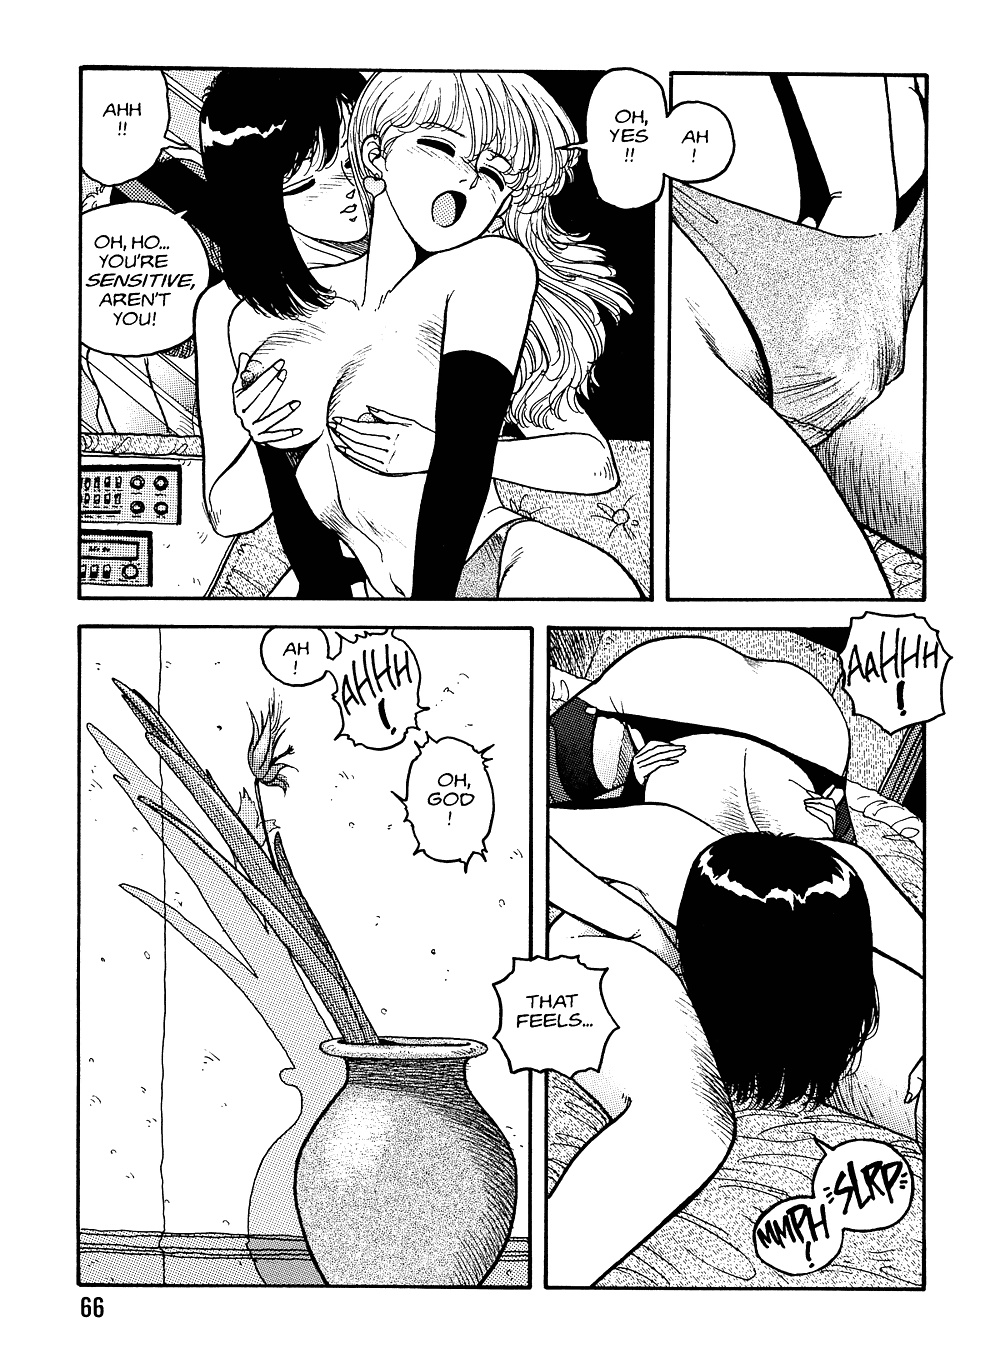 69 - sixty nine - giving and receiving - hentai 7 #26426713